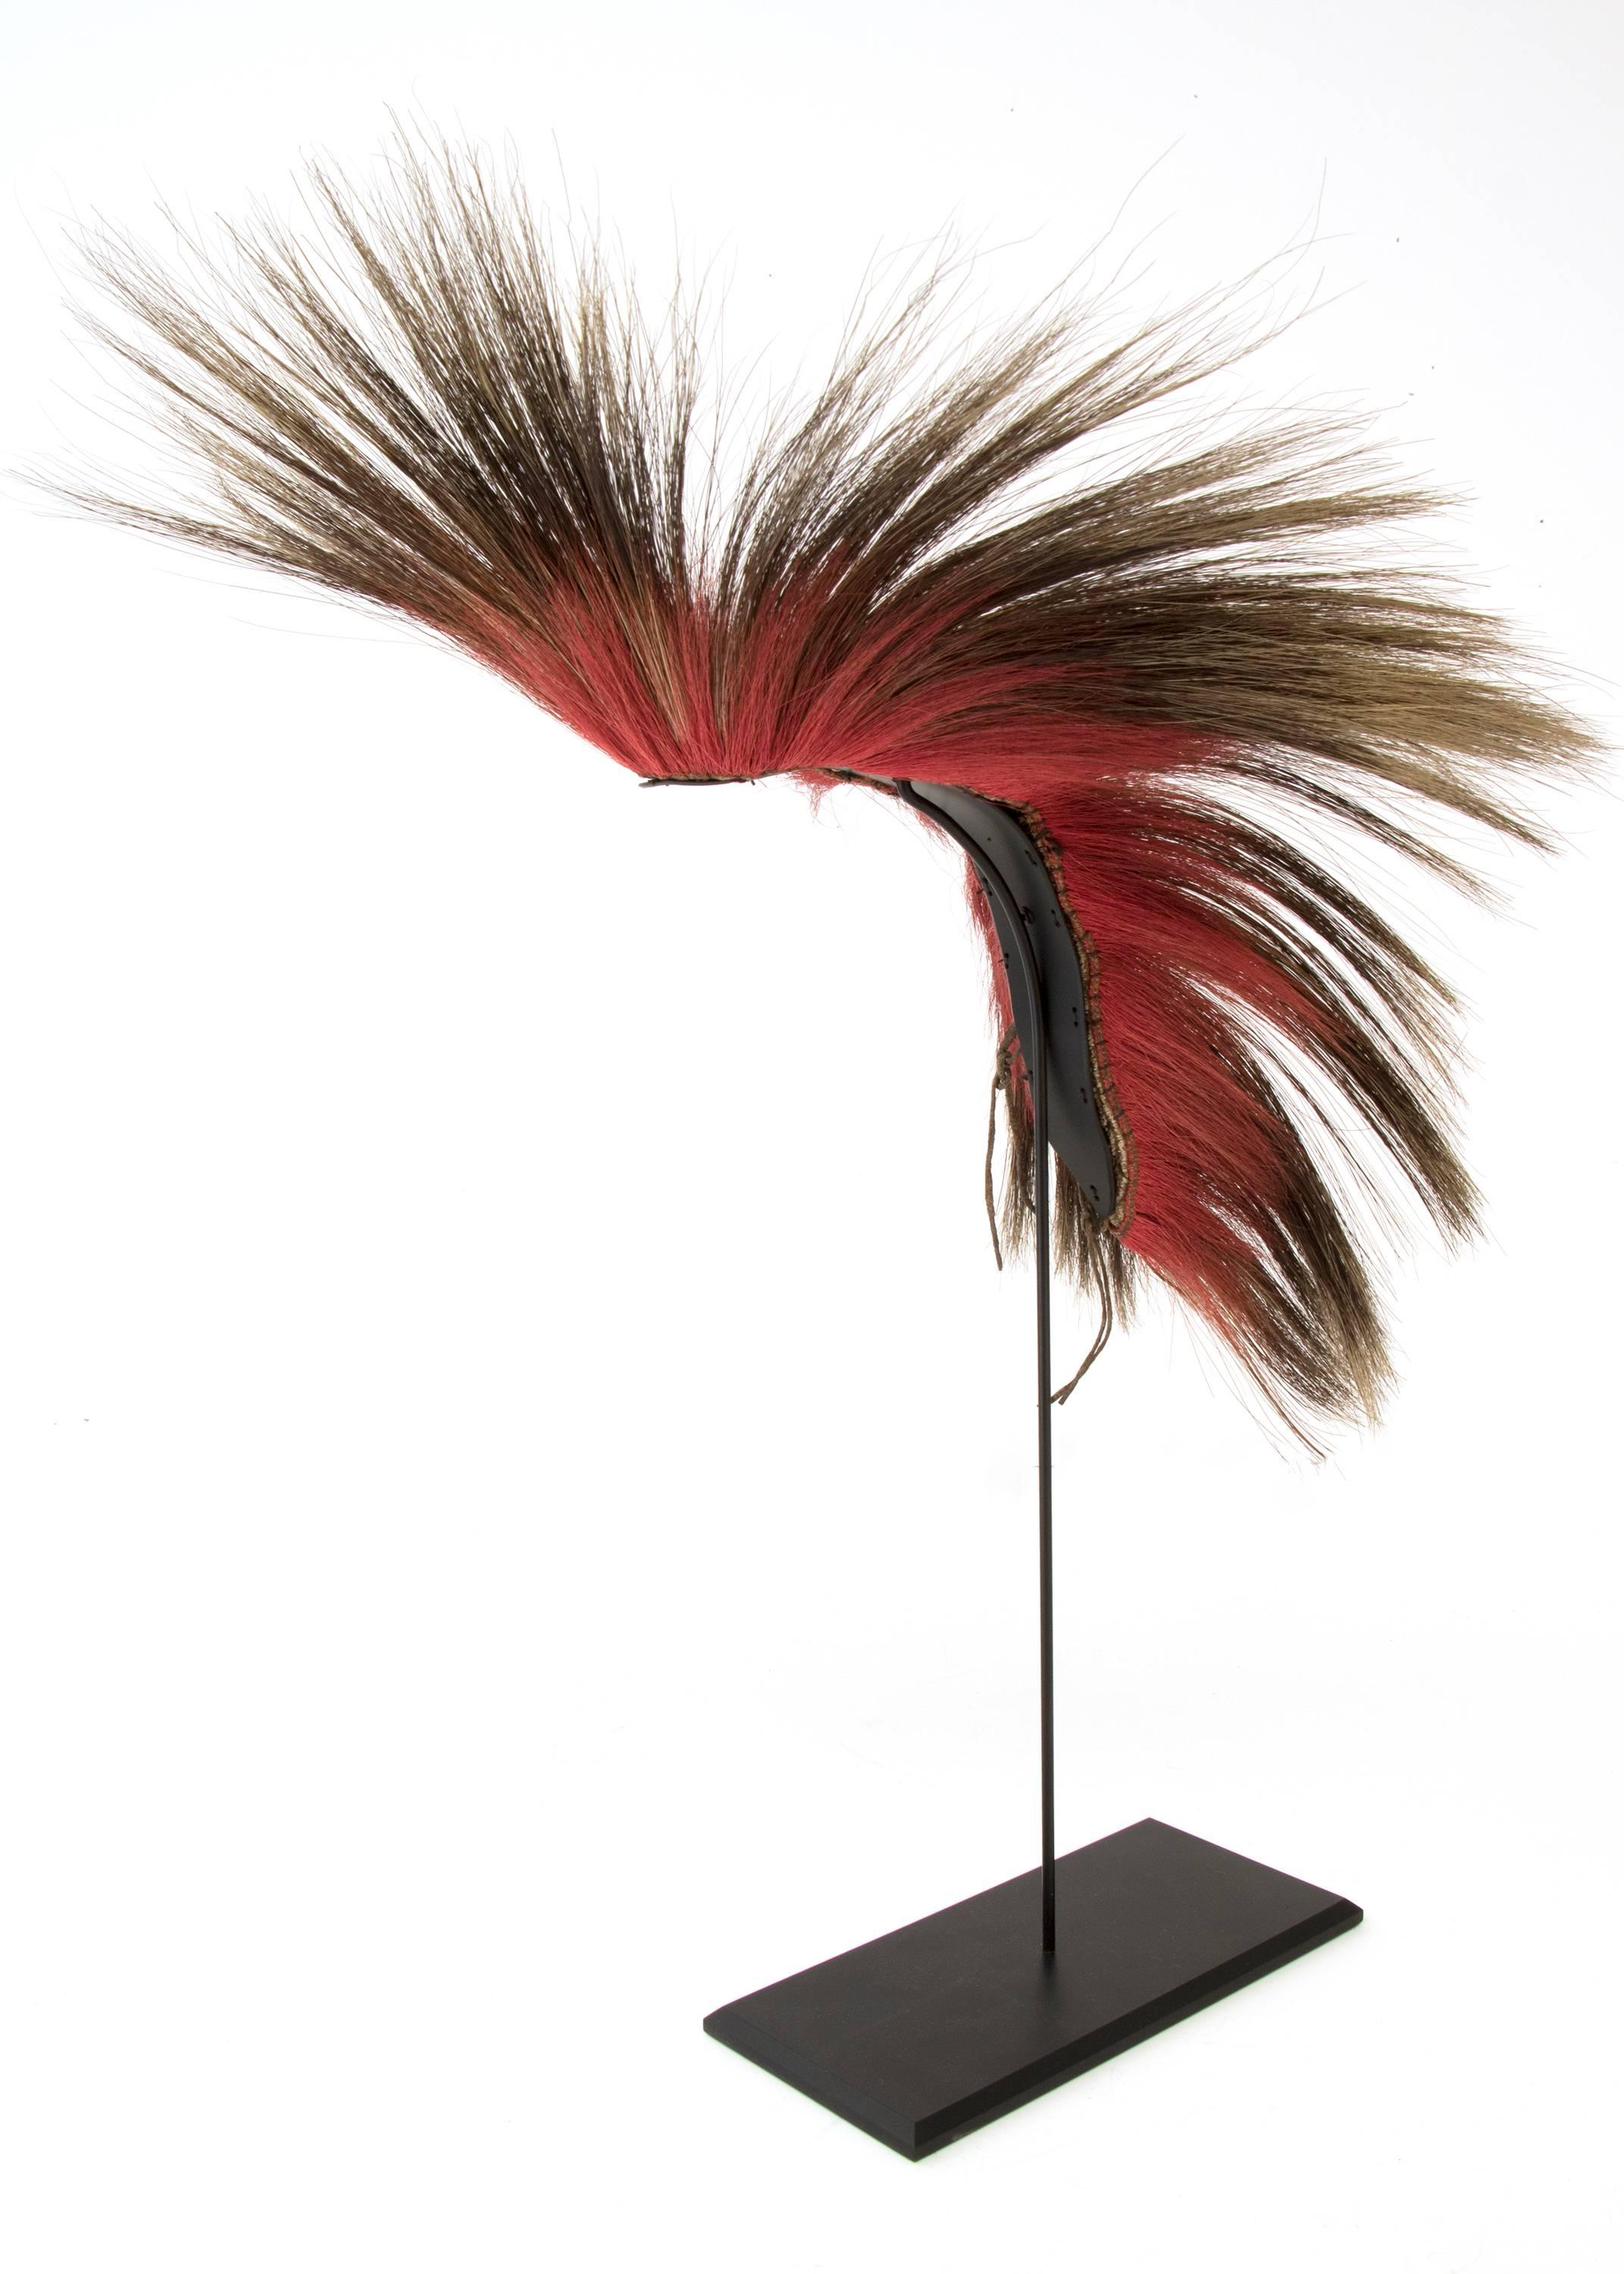 A plains Indian roach “Headdress or Hair Ornament”. Custom display stand is included. Dimensions without stand measures 15 x 15 x 16 inches. Height with stand is 21 inches.

 